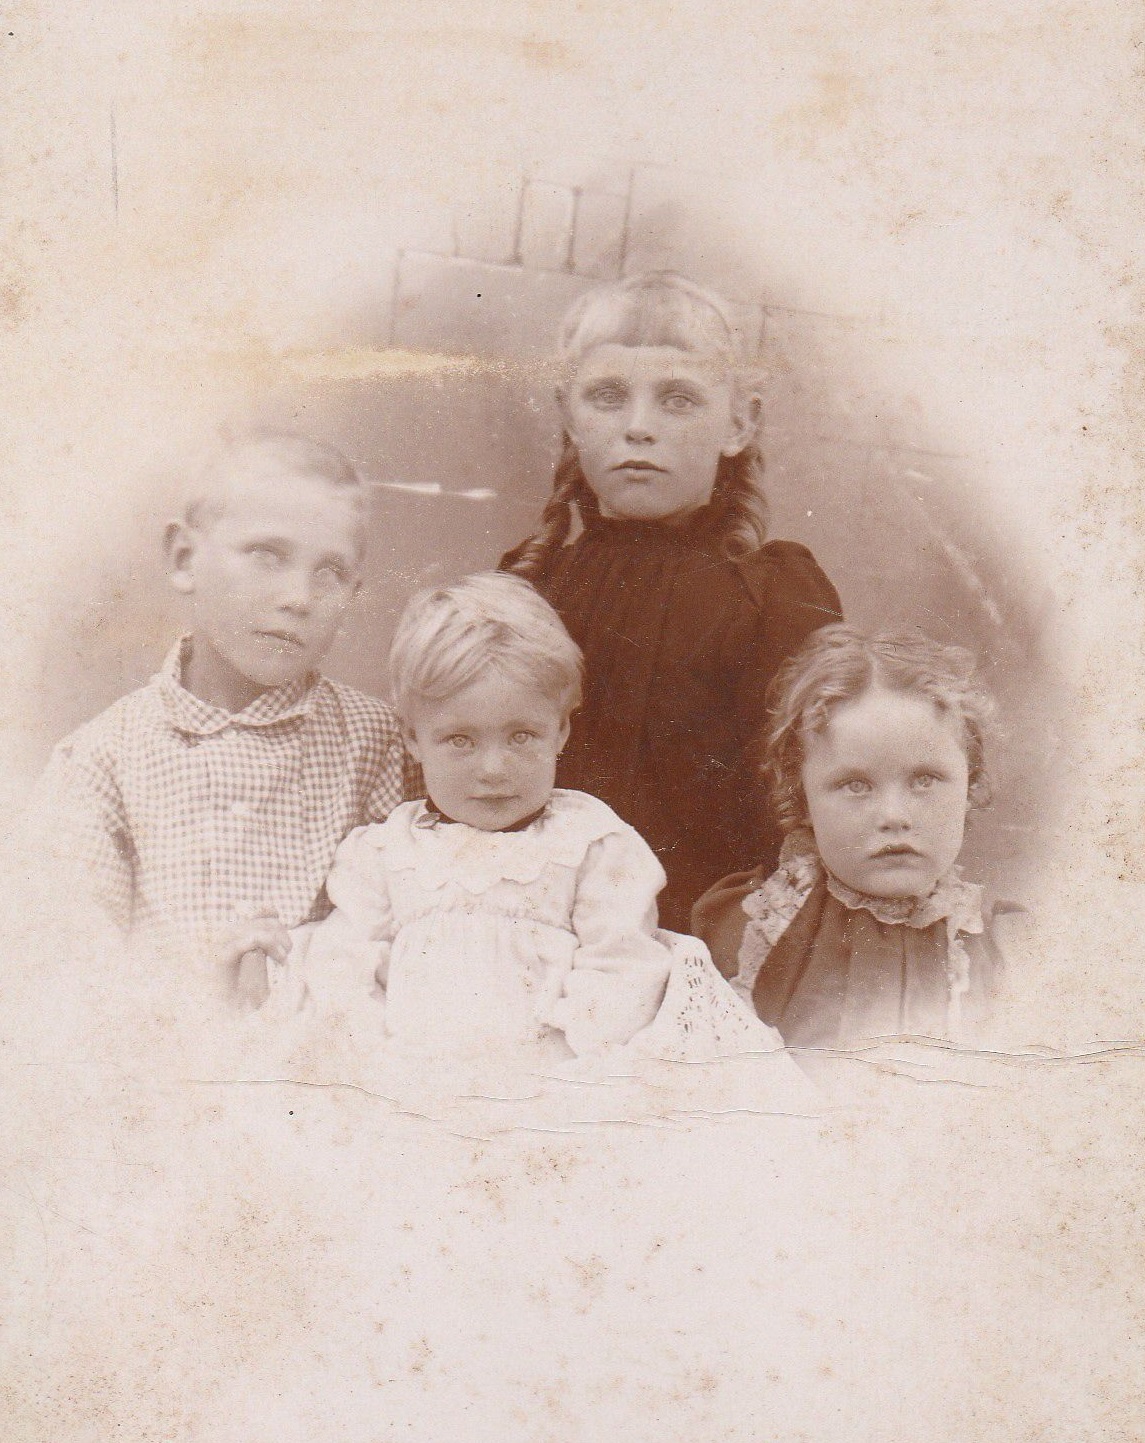 With her siblings. From left to right: Robert (aged 6), Laura (aged 2), Chloe (aged 8), and Sarah (aged 4). (Source: Find A Grave)